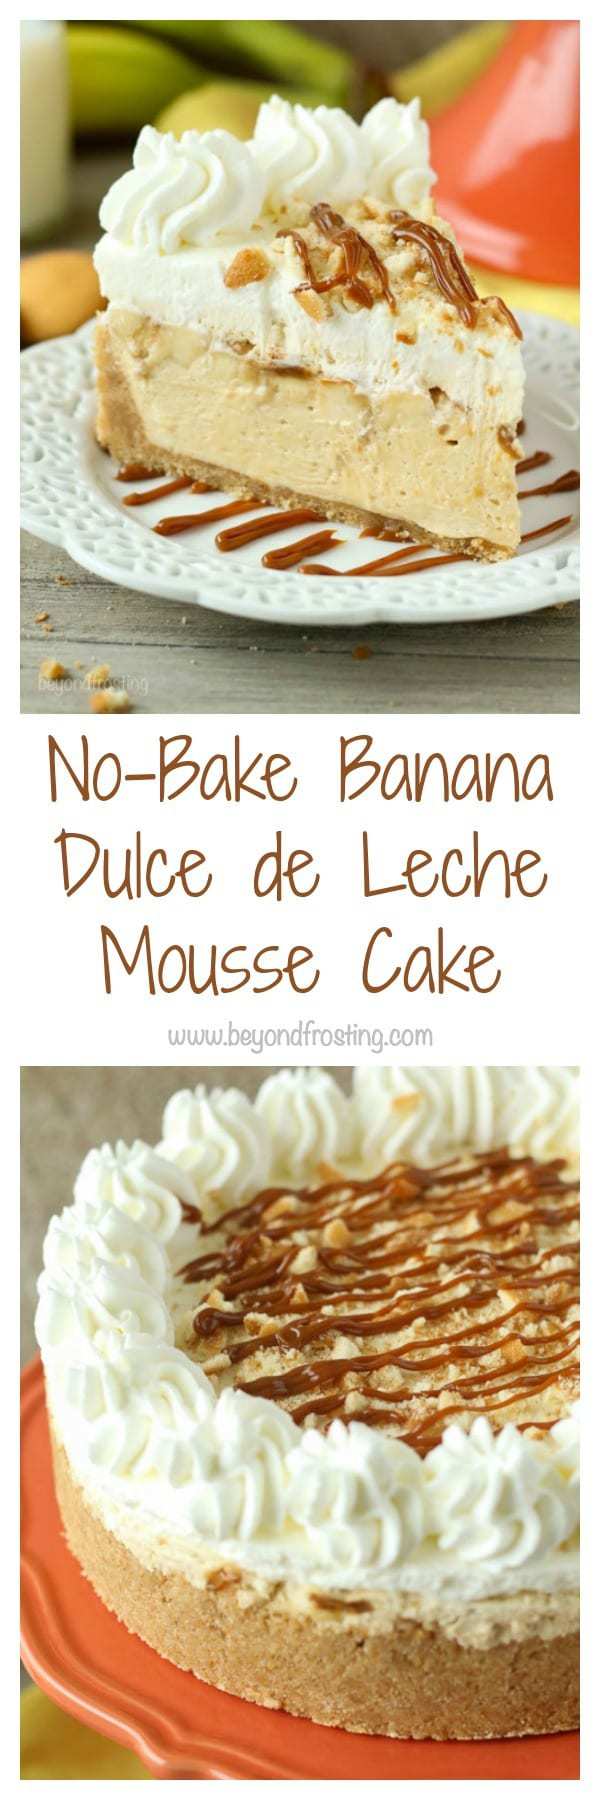  This No-Bake Banana Dulce De Leche Mousse Cake is layers of dulce de leche mousse and fresh sliced banana under a layer of banana pudding mousse with a Nilla wafer crust and whipped cream on top.